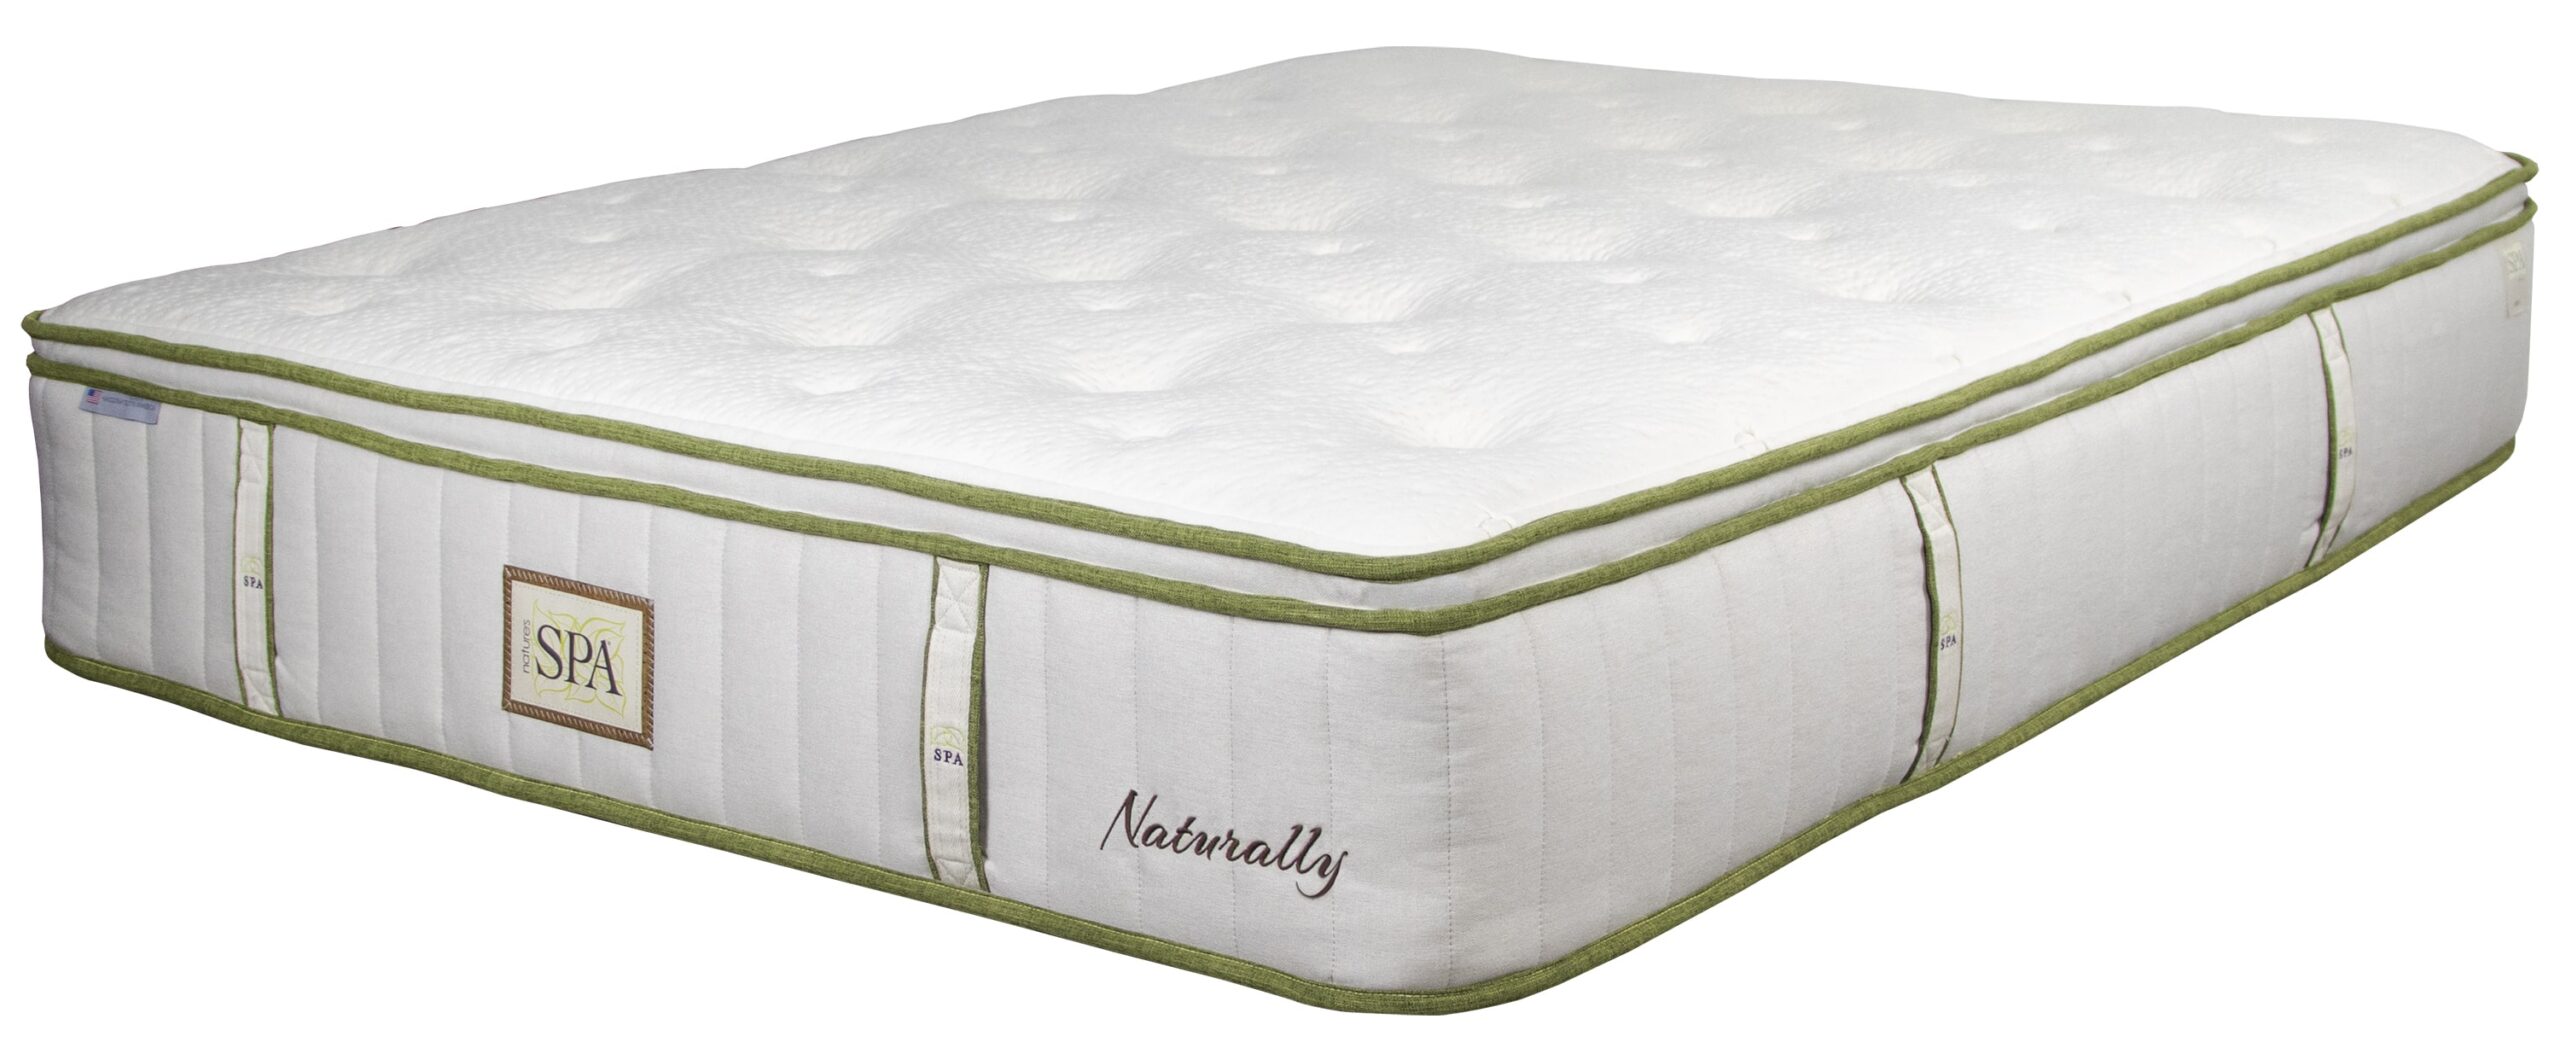 nature's spa by paramount jazmine mattress review